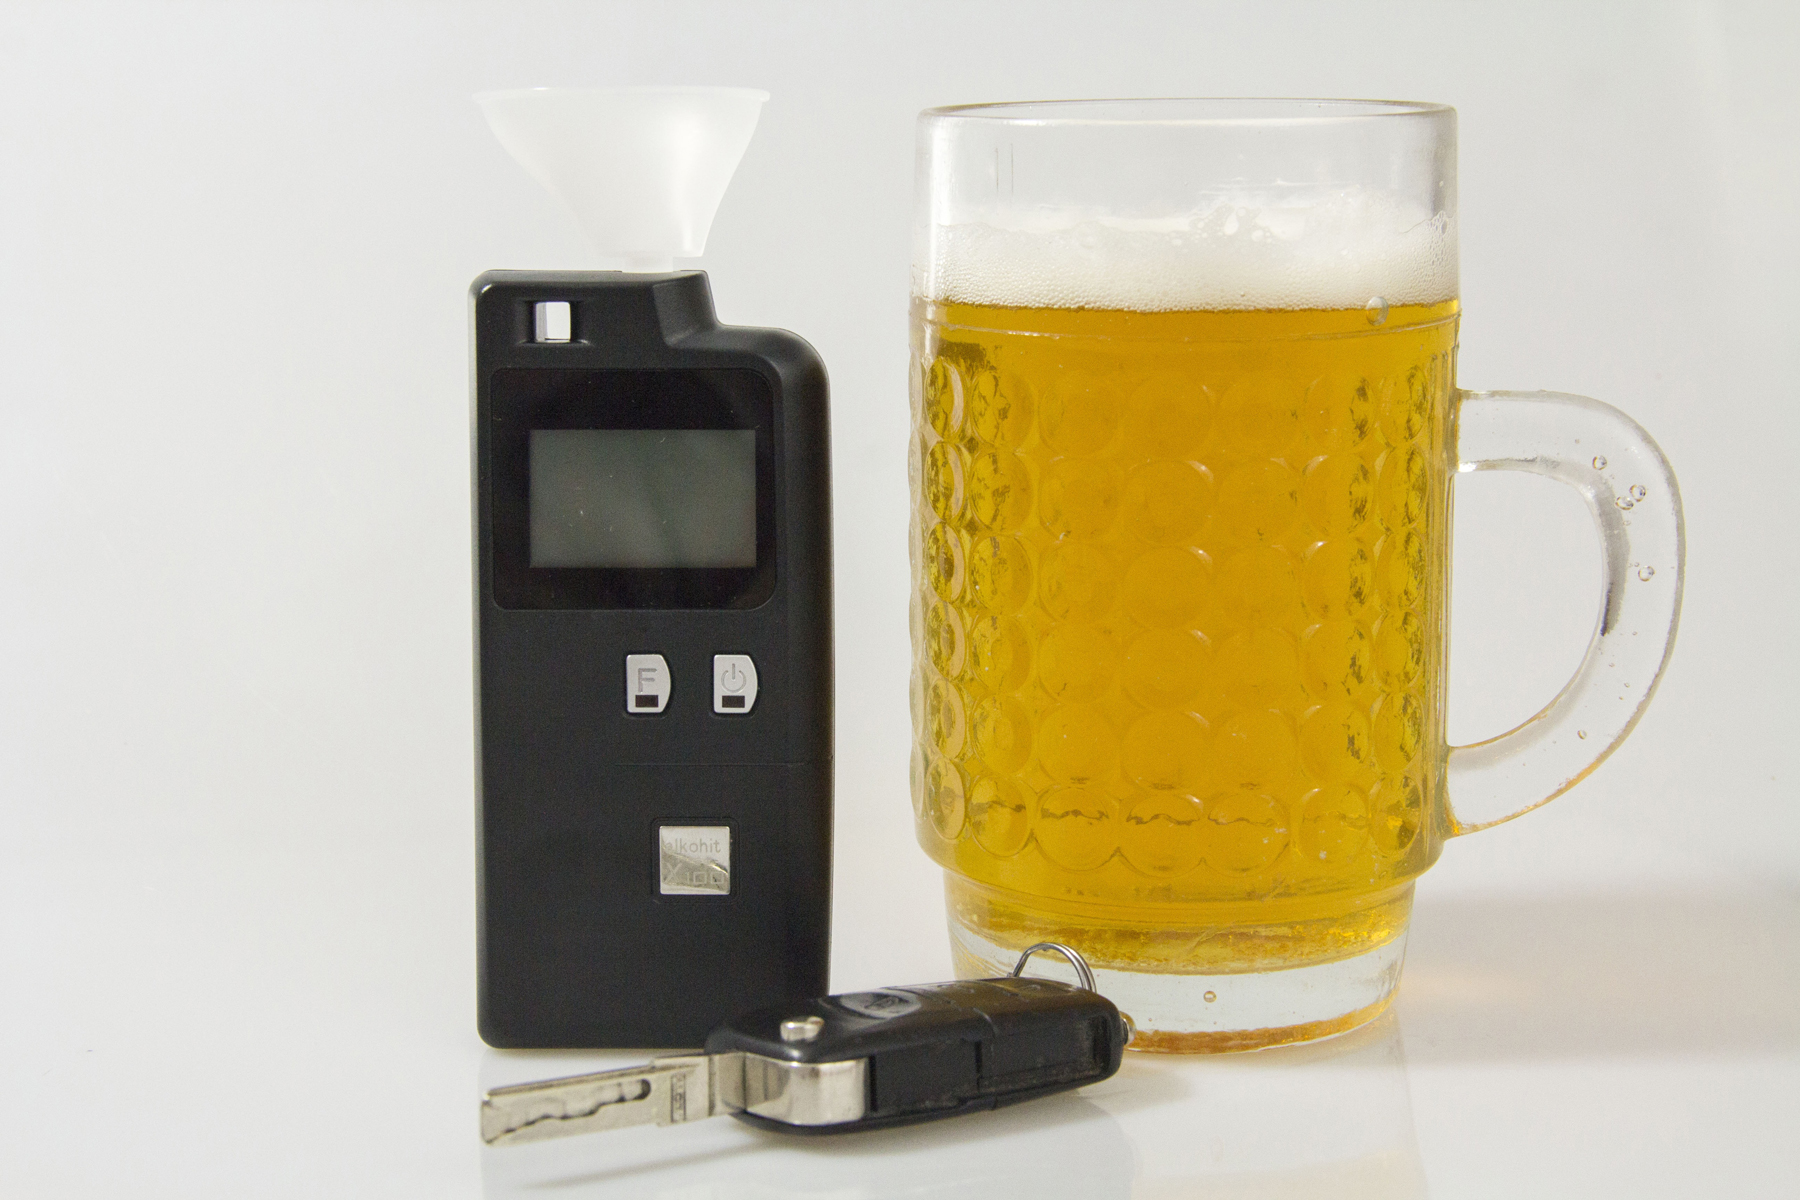 An electronic breathalyser on a table next to a pair of car keys and a pint of beer